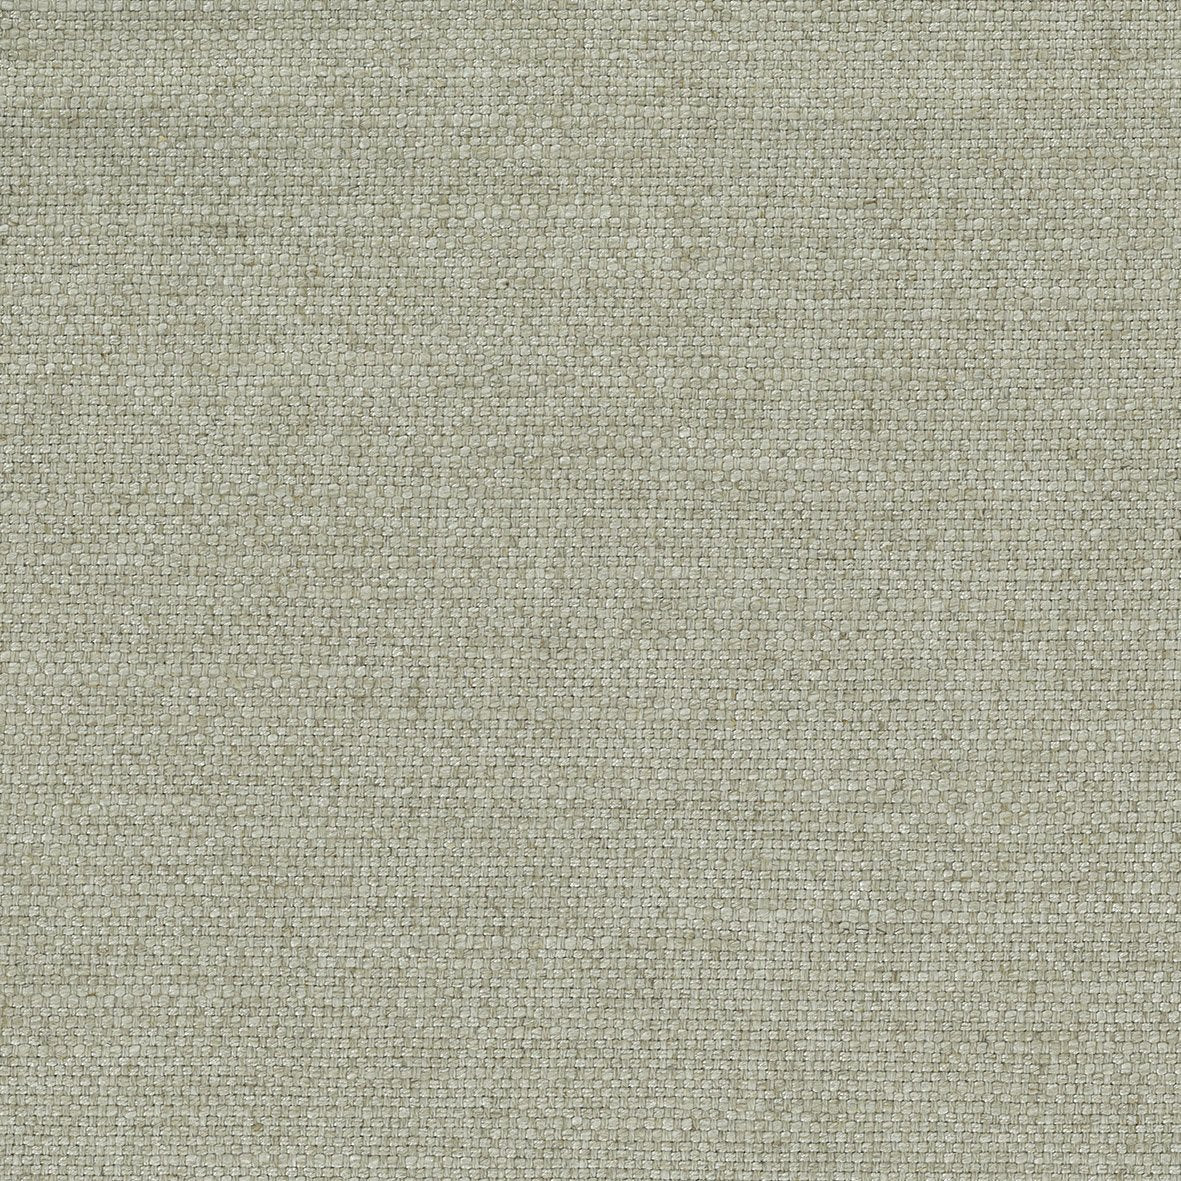 Nina Campbell Fabric - Poquelin Colette Grey NCF4312-03